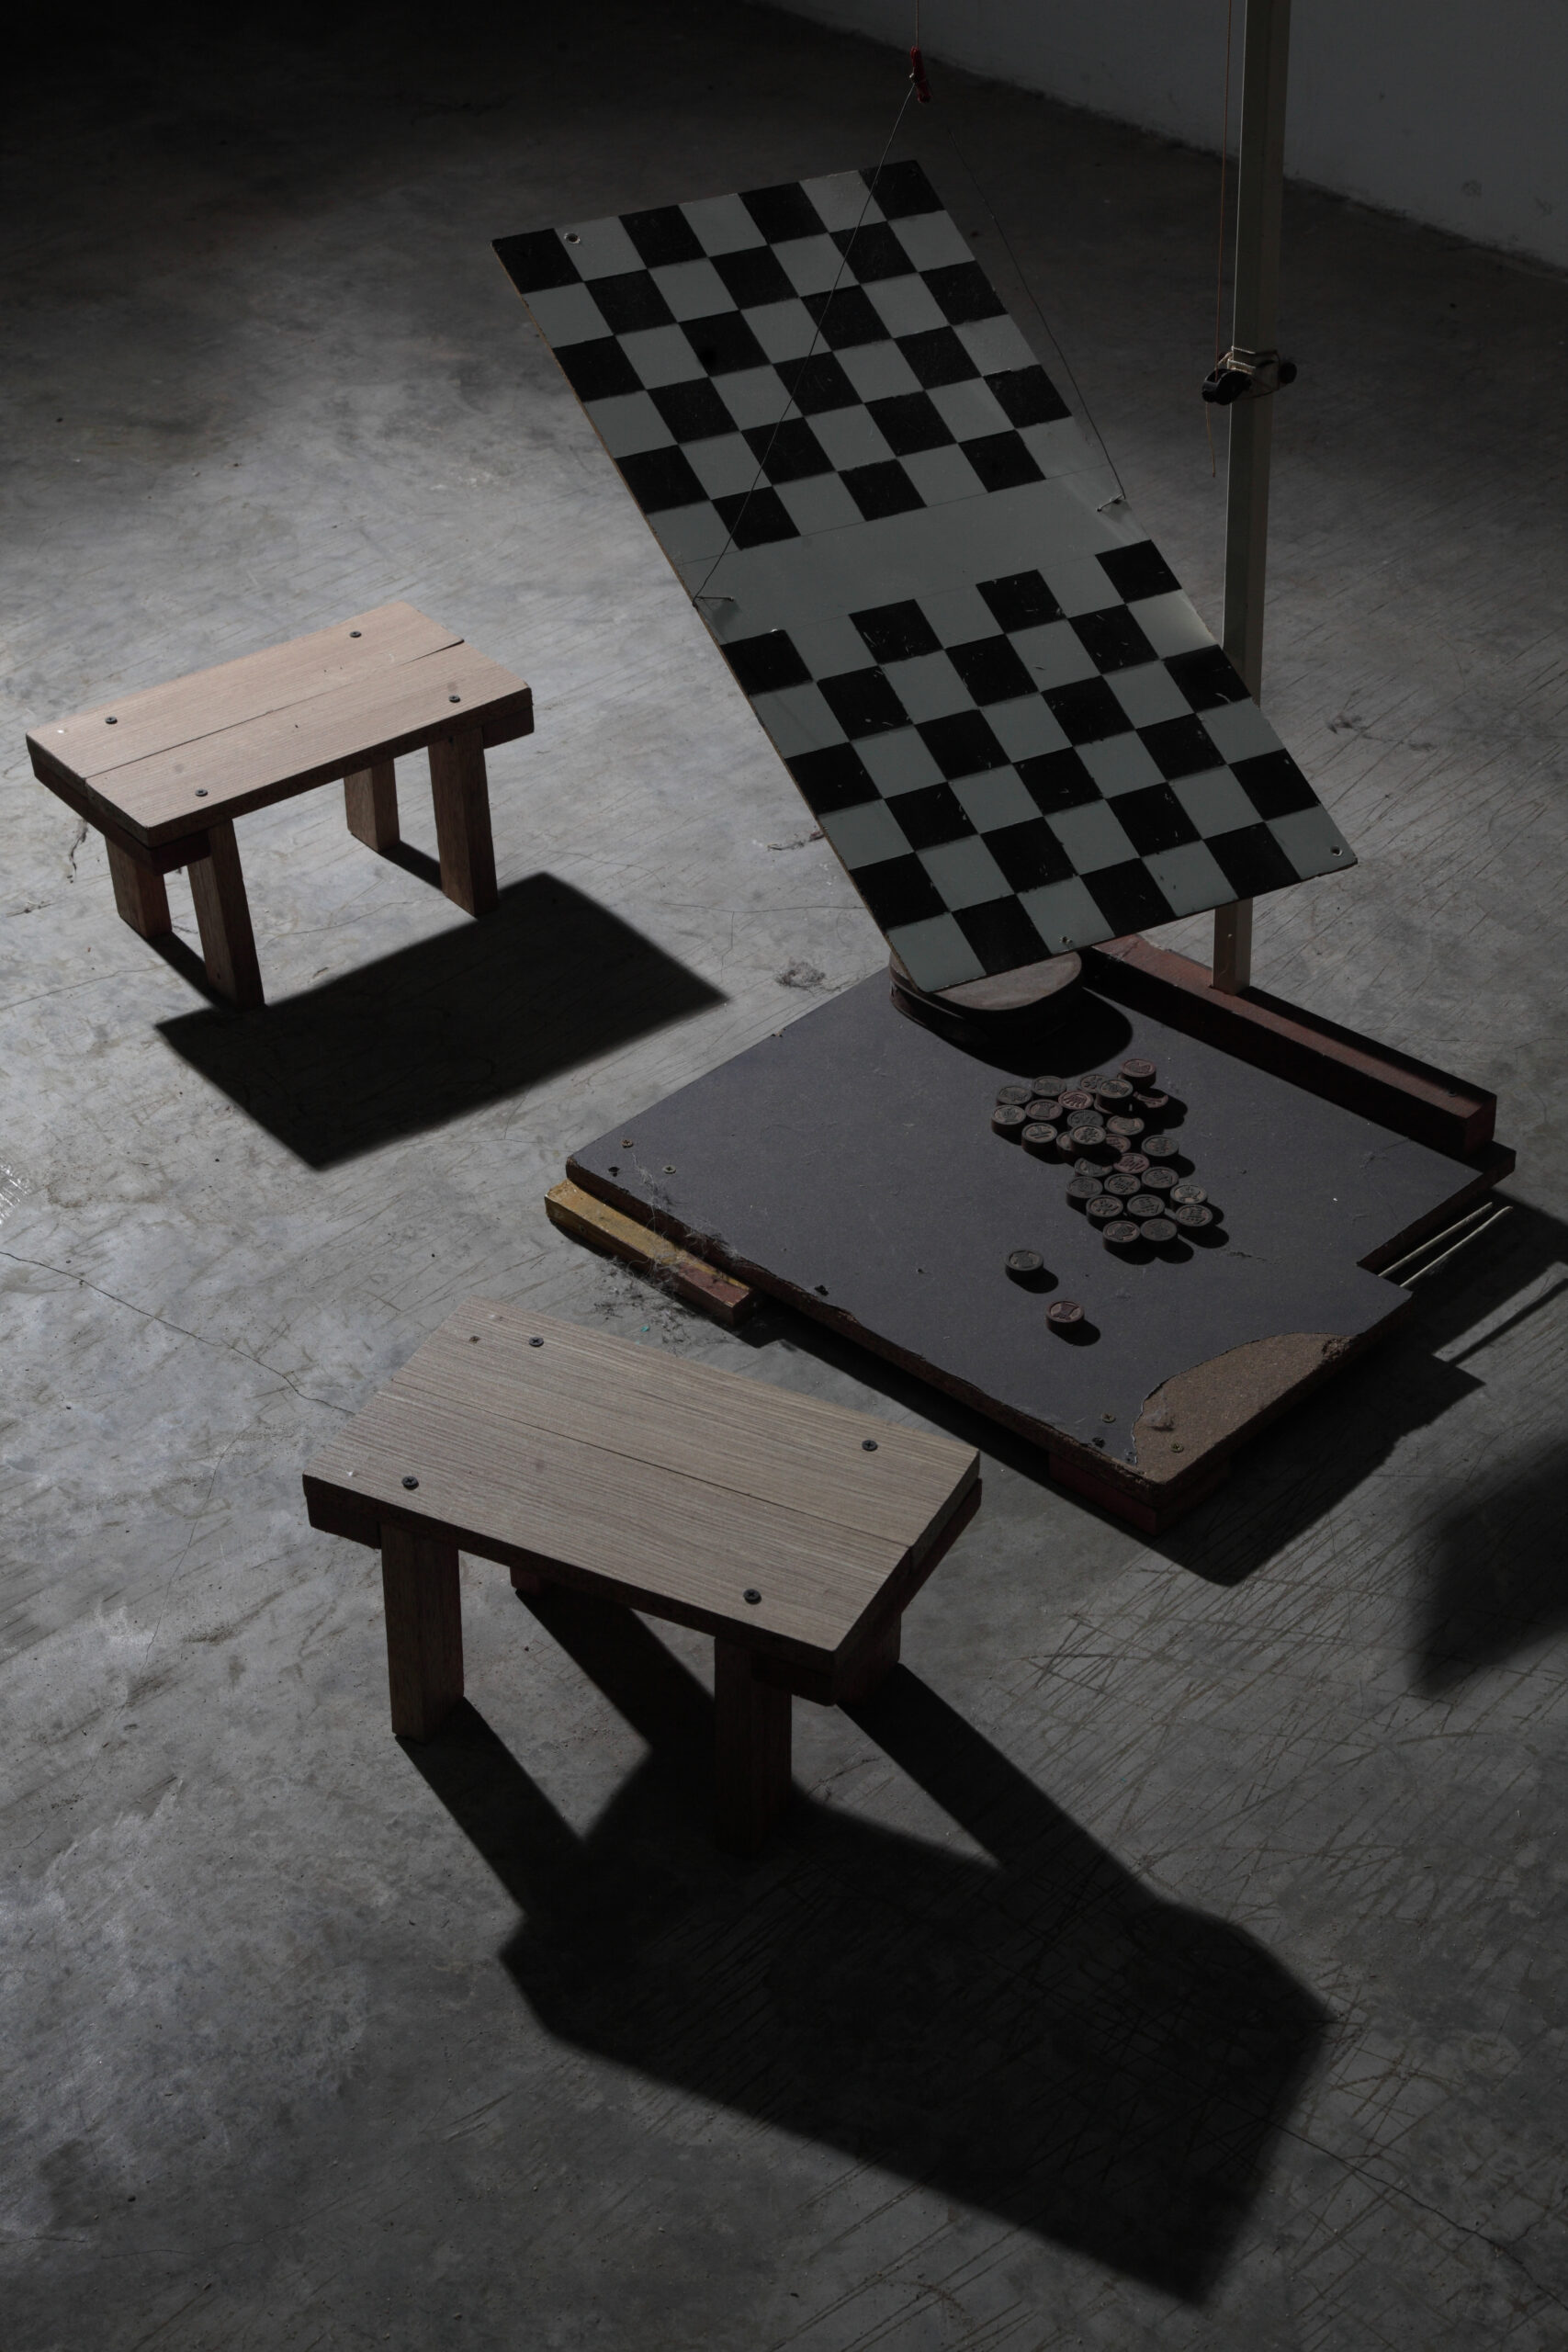 Tagistani Floating Chess details - 2020